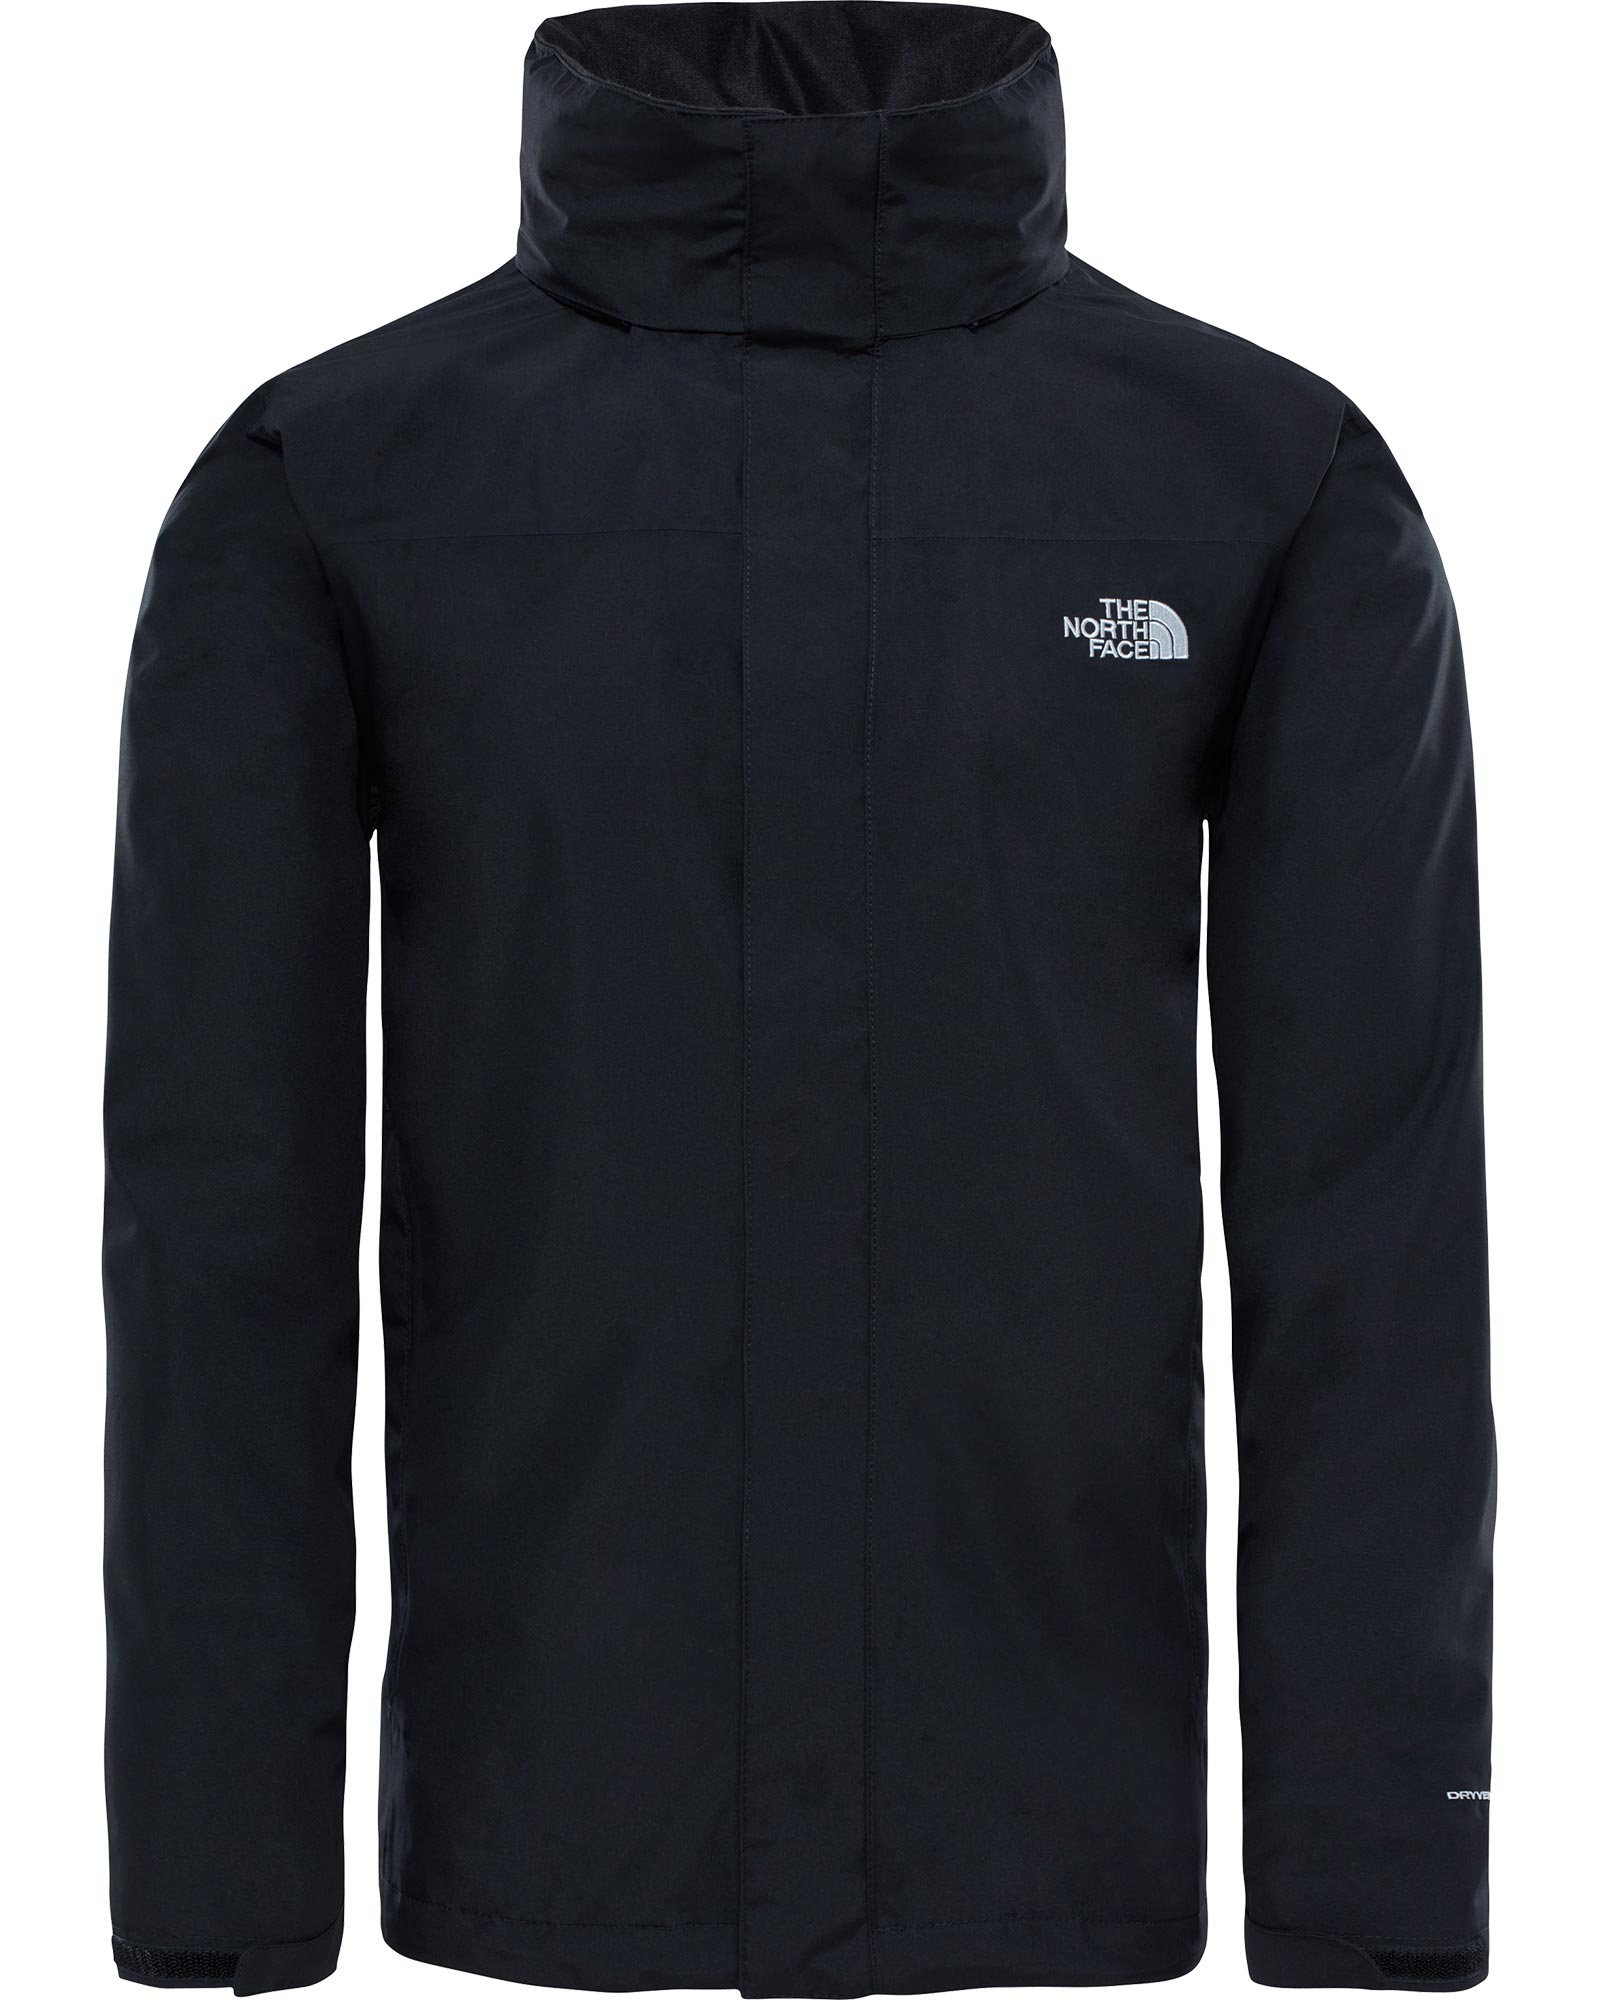 The North Face Sangro DryVent Men's Jacket | Outside & Active